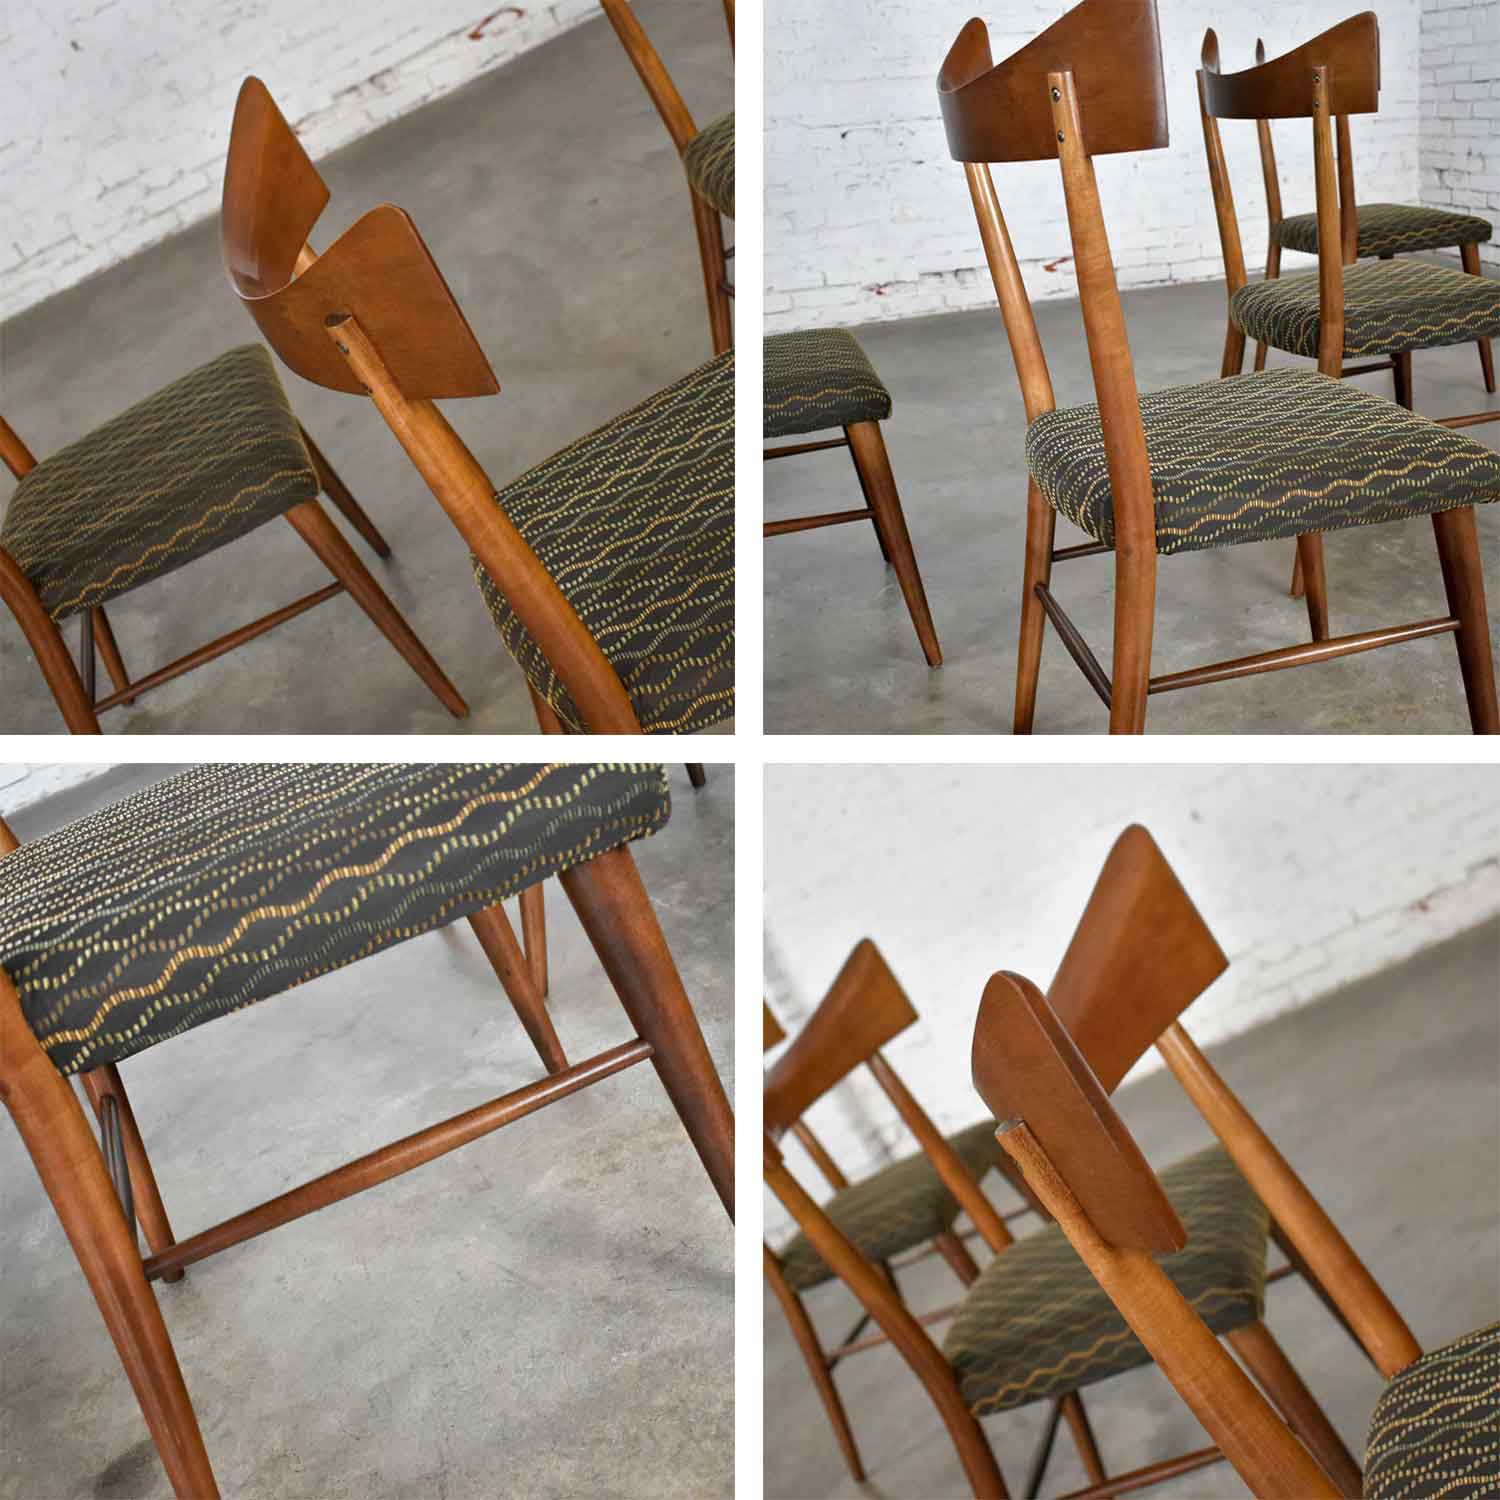 Mid-Century Modern Planner Group Dining Chairs by Paul McCobb for Winchendon Set of 5